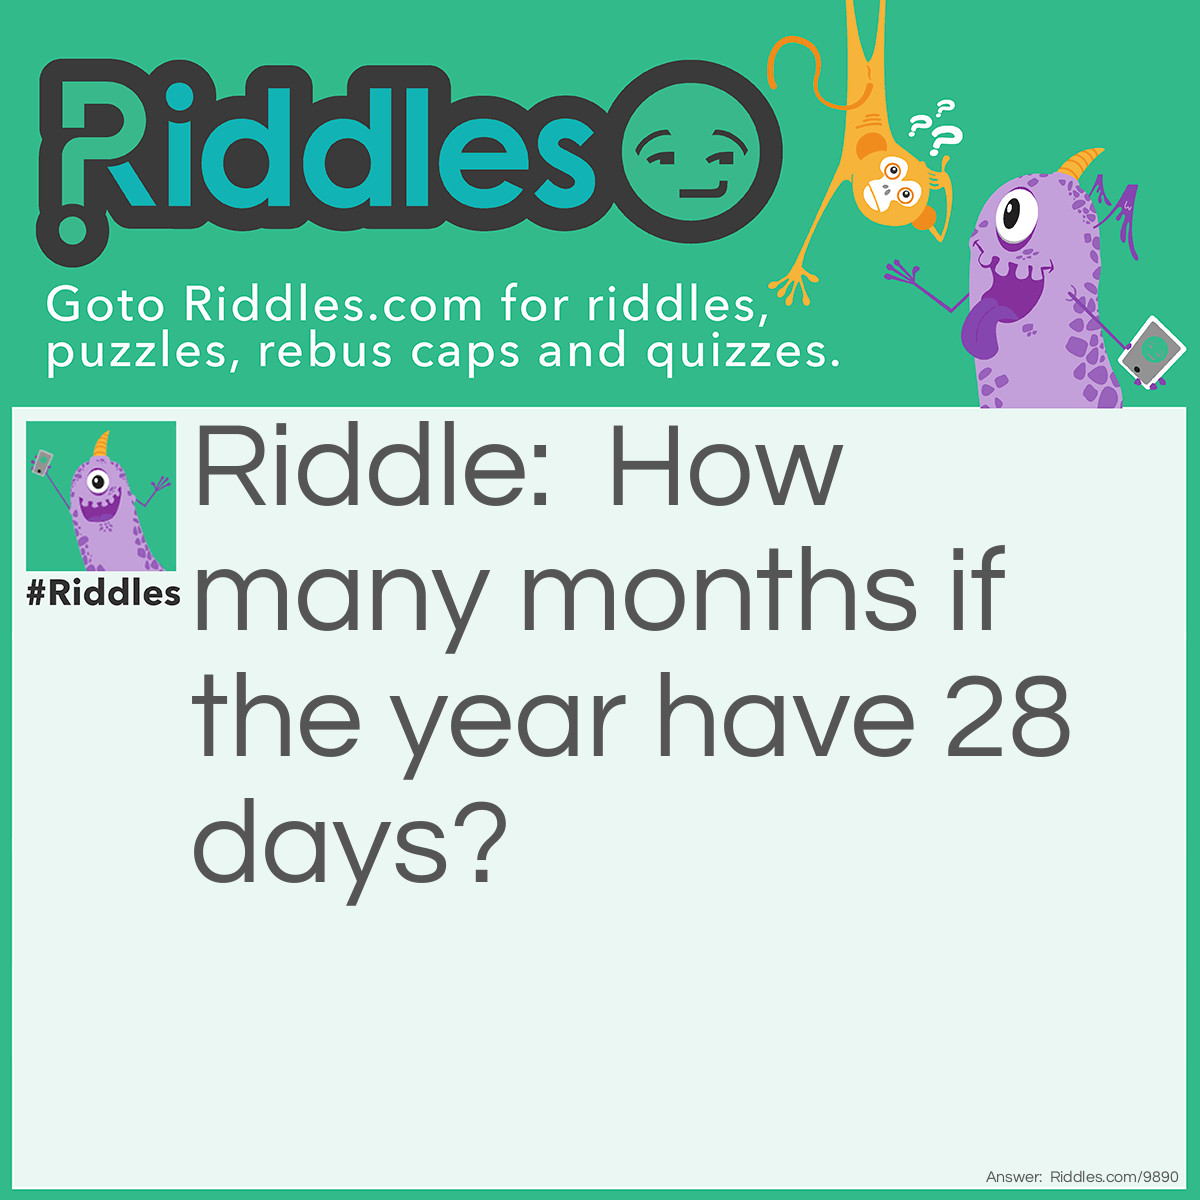 Riddle: How many months if the year have 28 days? Answer: All of them.